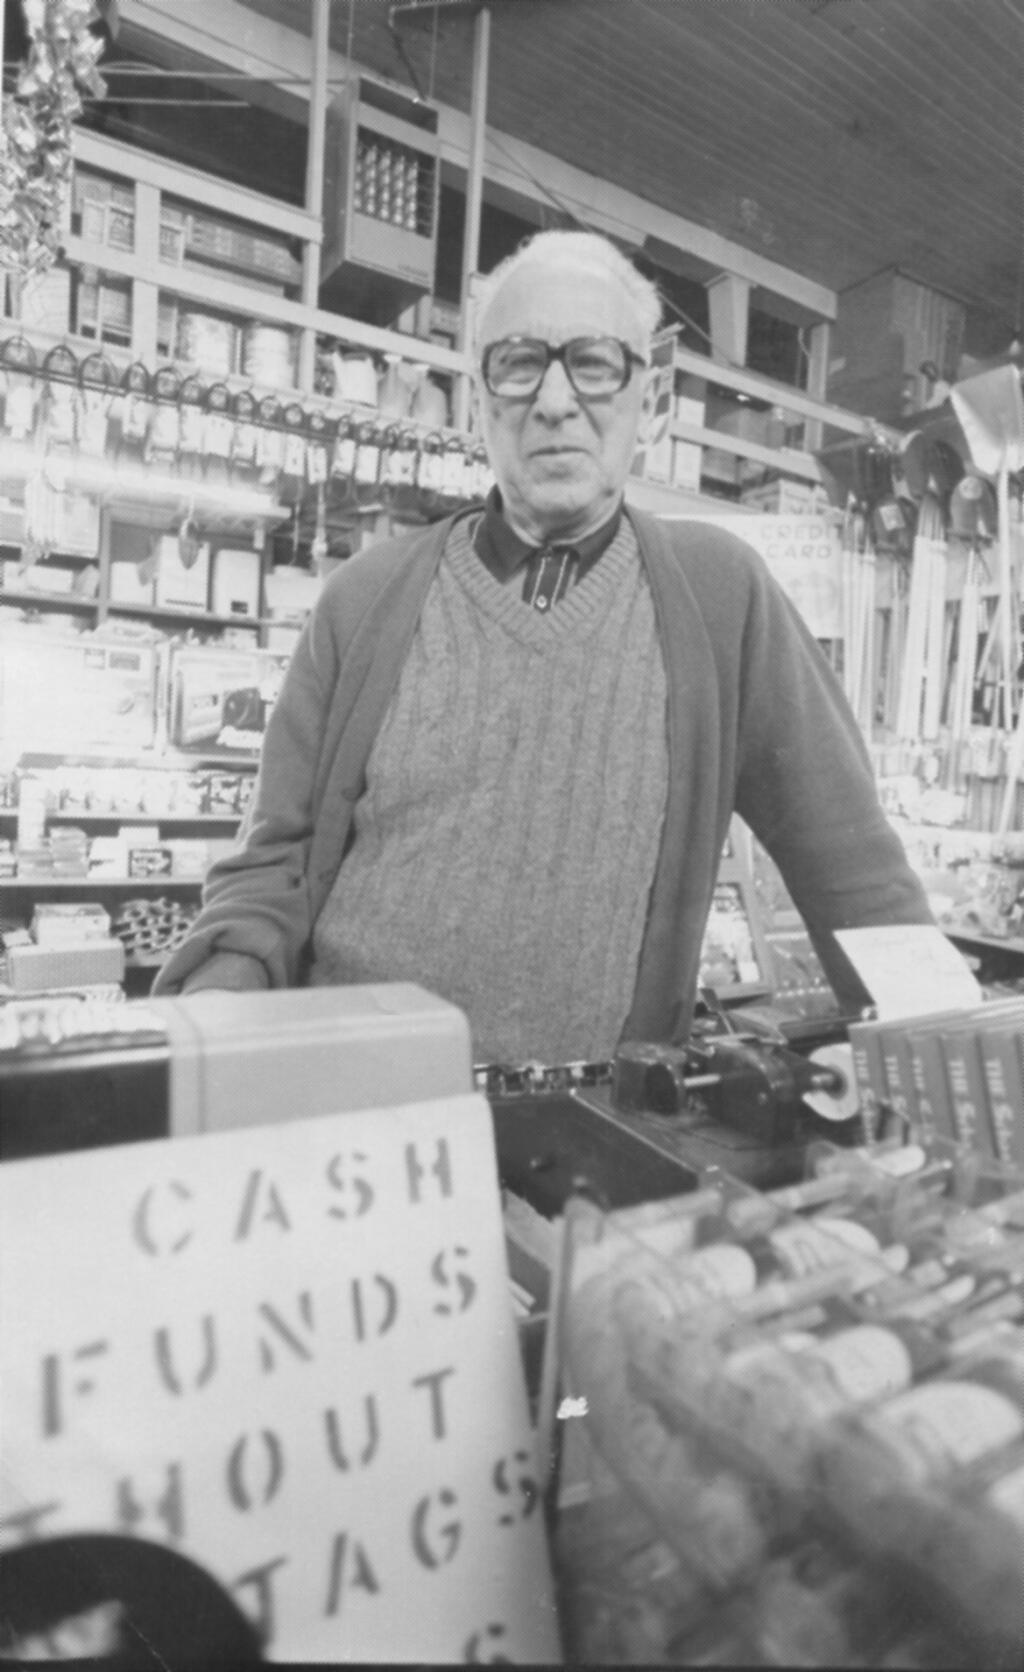 August Pinelli’s Mission Hardware Store was crammed with every imaginable household item. If he didn’t have it, he willingly ordered for you. (Photo: Bill Lynch)